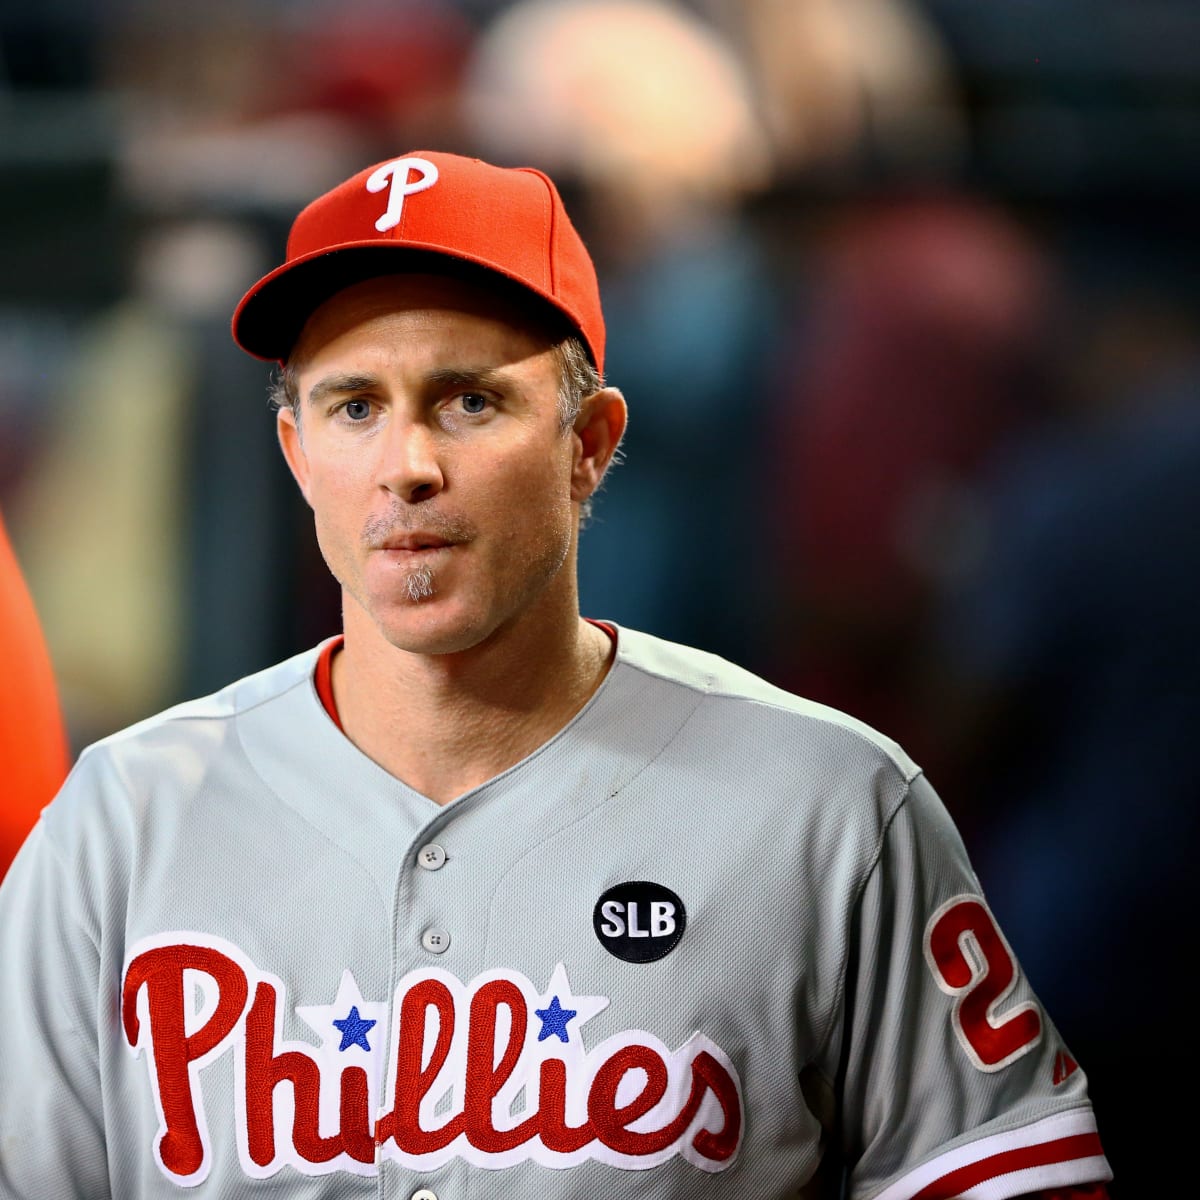 Hall of Fame or Not, Chase Utley Was 'The Man' for Philadelphia